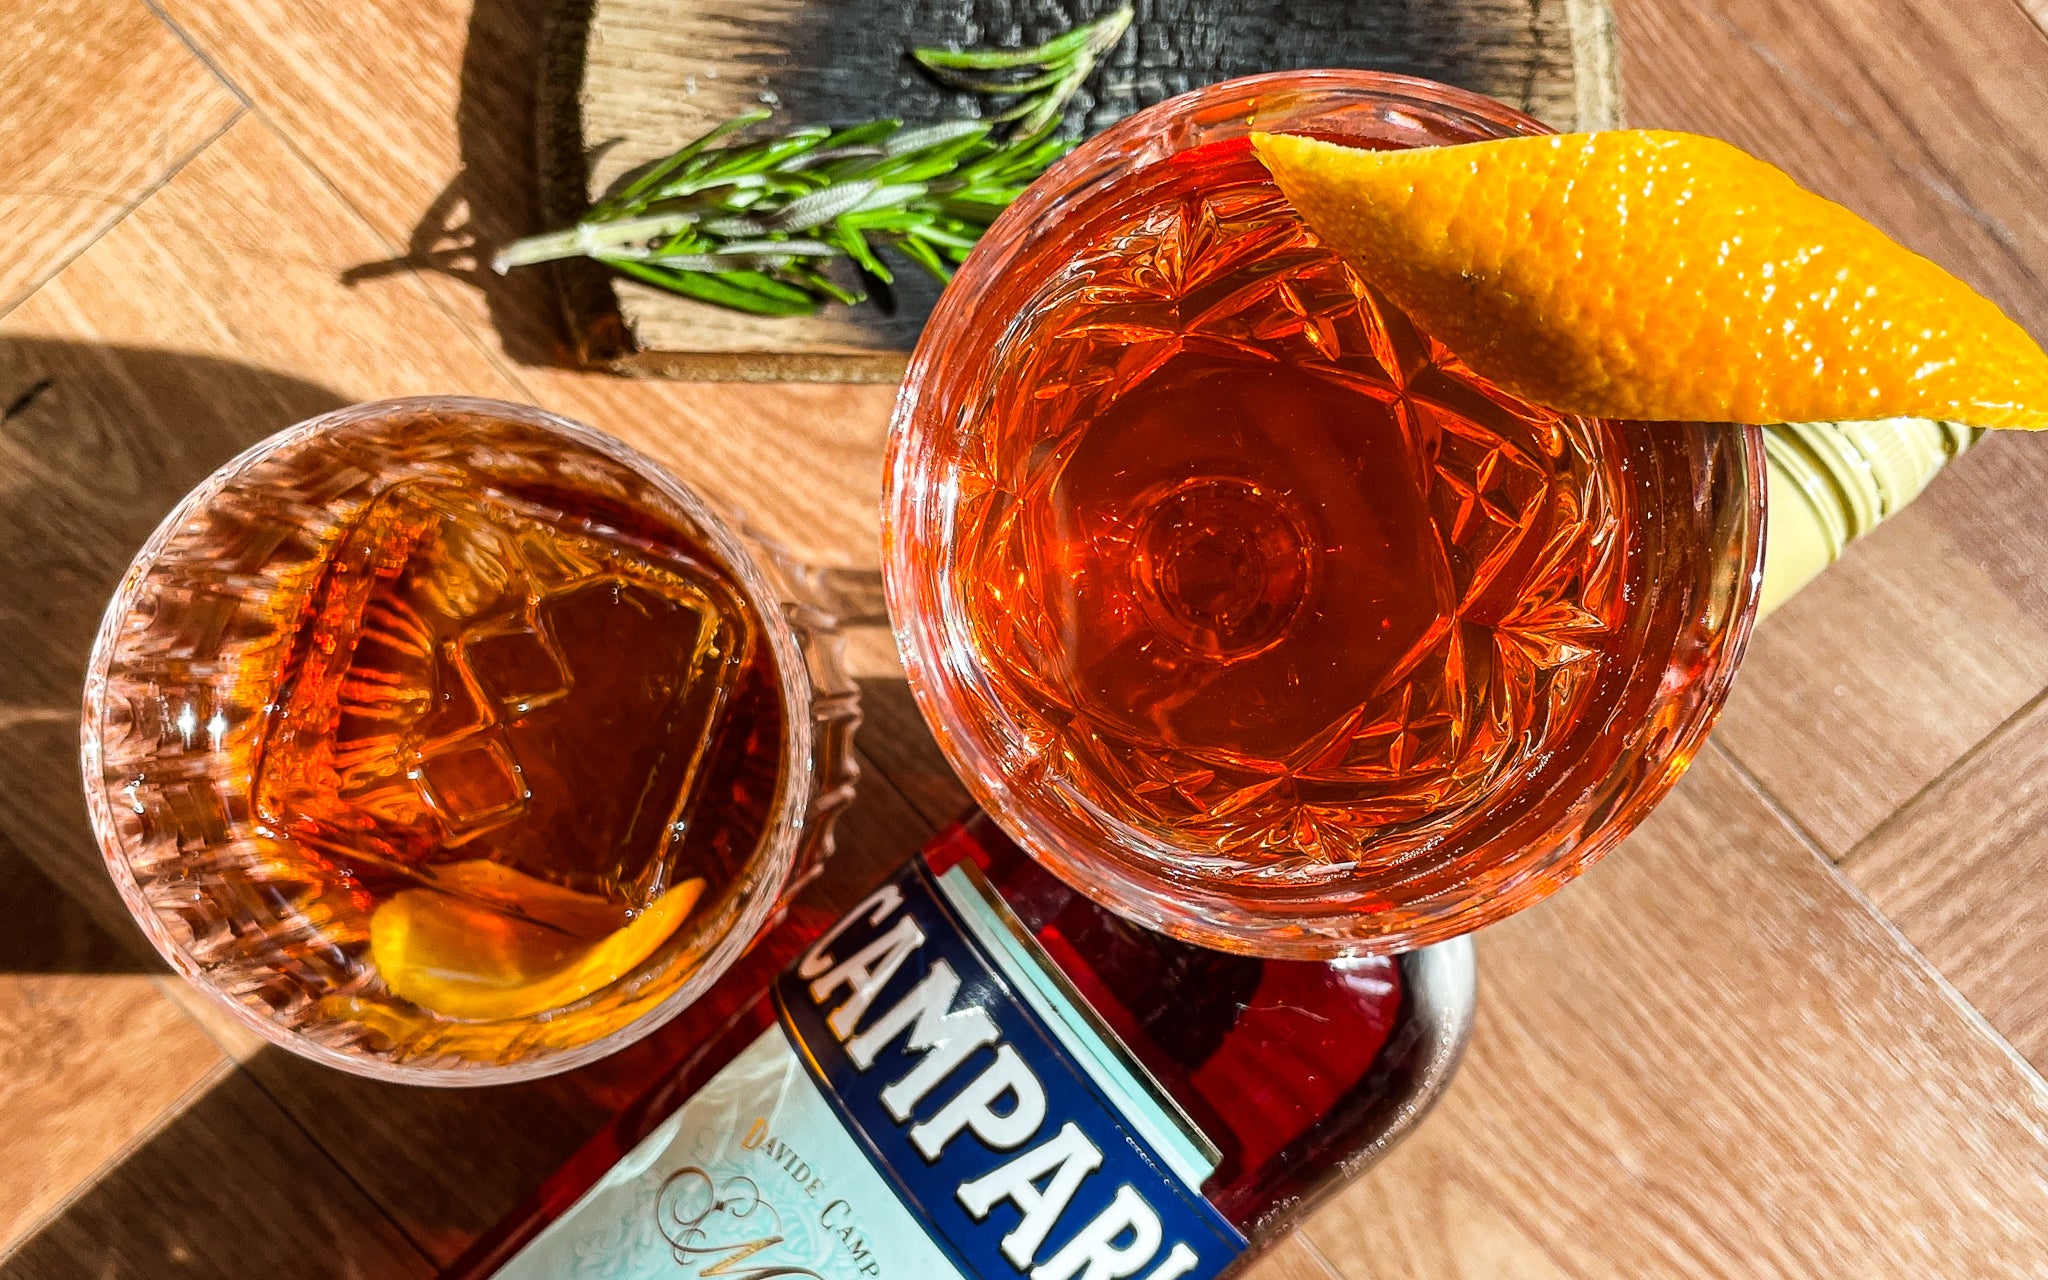 How we came up with our Juhua Rosemary Wood-Smoked Negroni